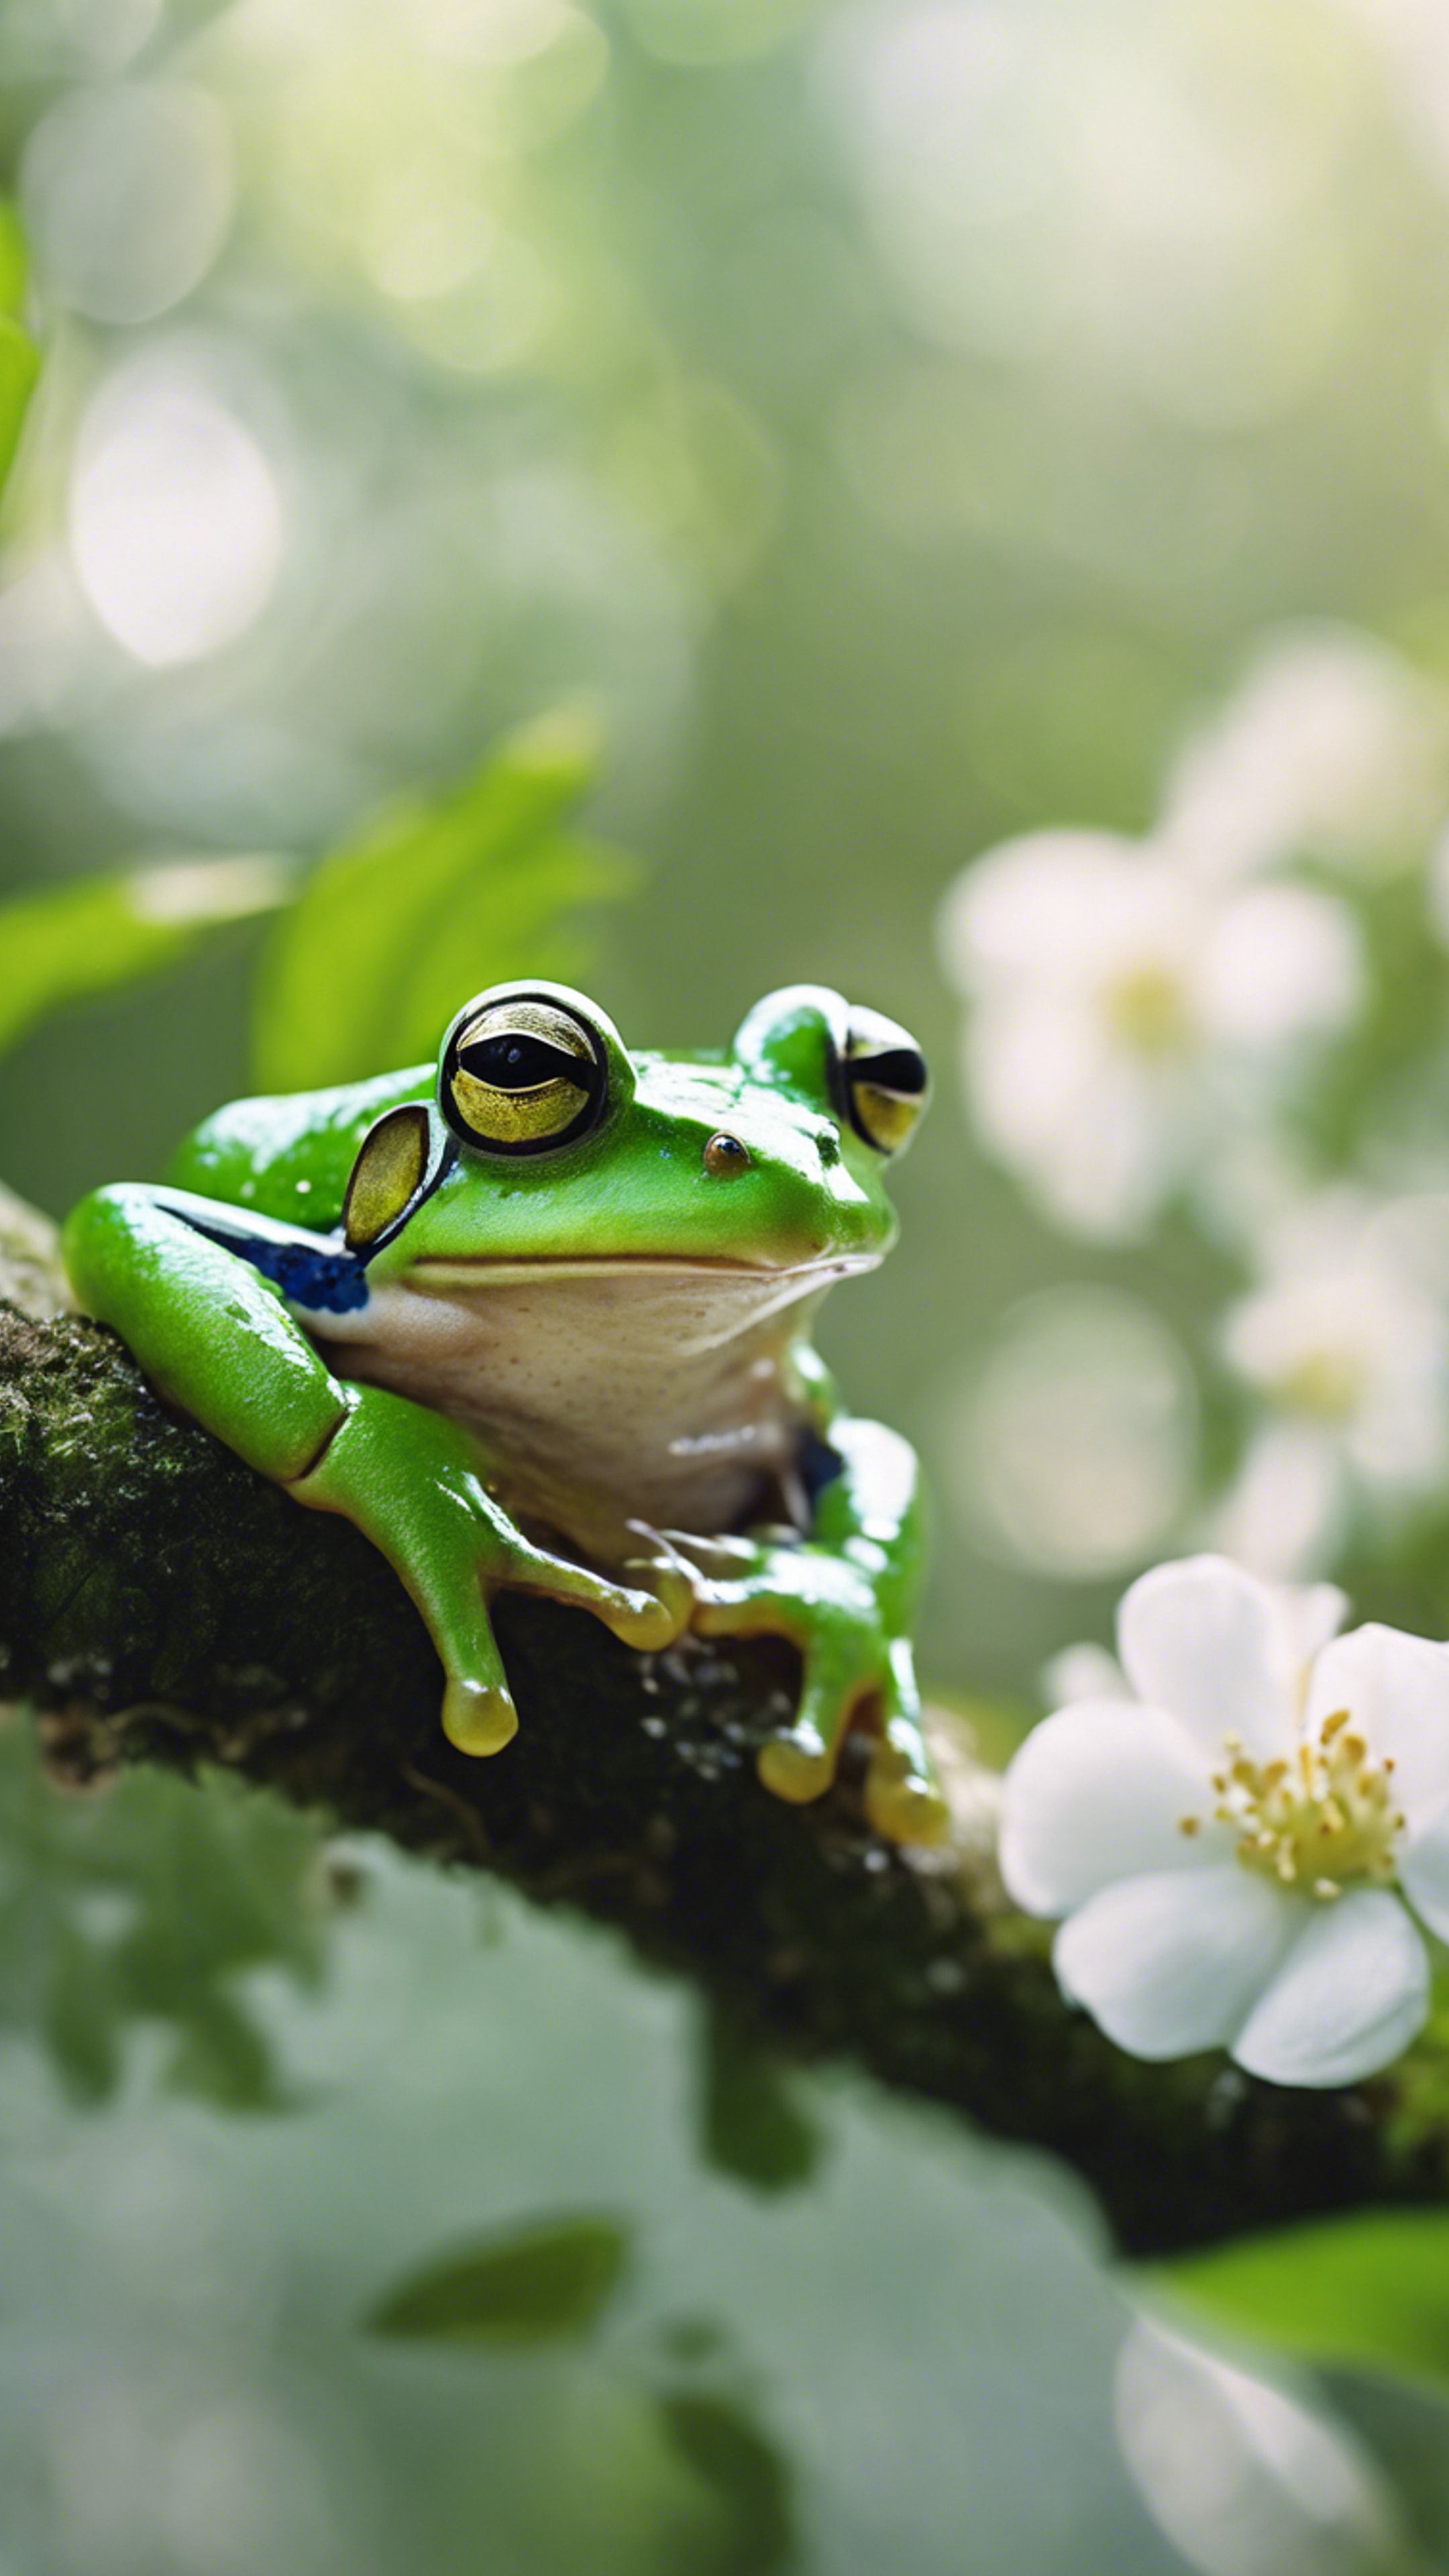 A bright green frog on a white blossom in the rainforest Hình nền[dcf59f9895044df59e99]